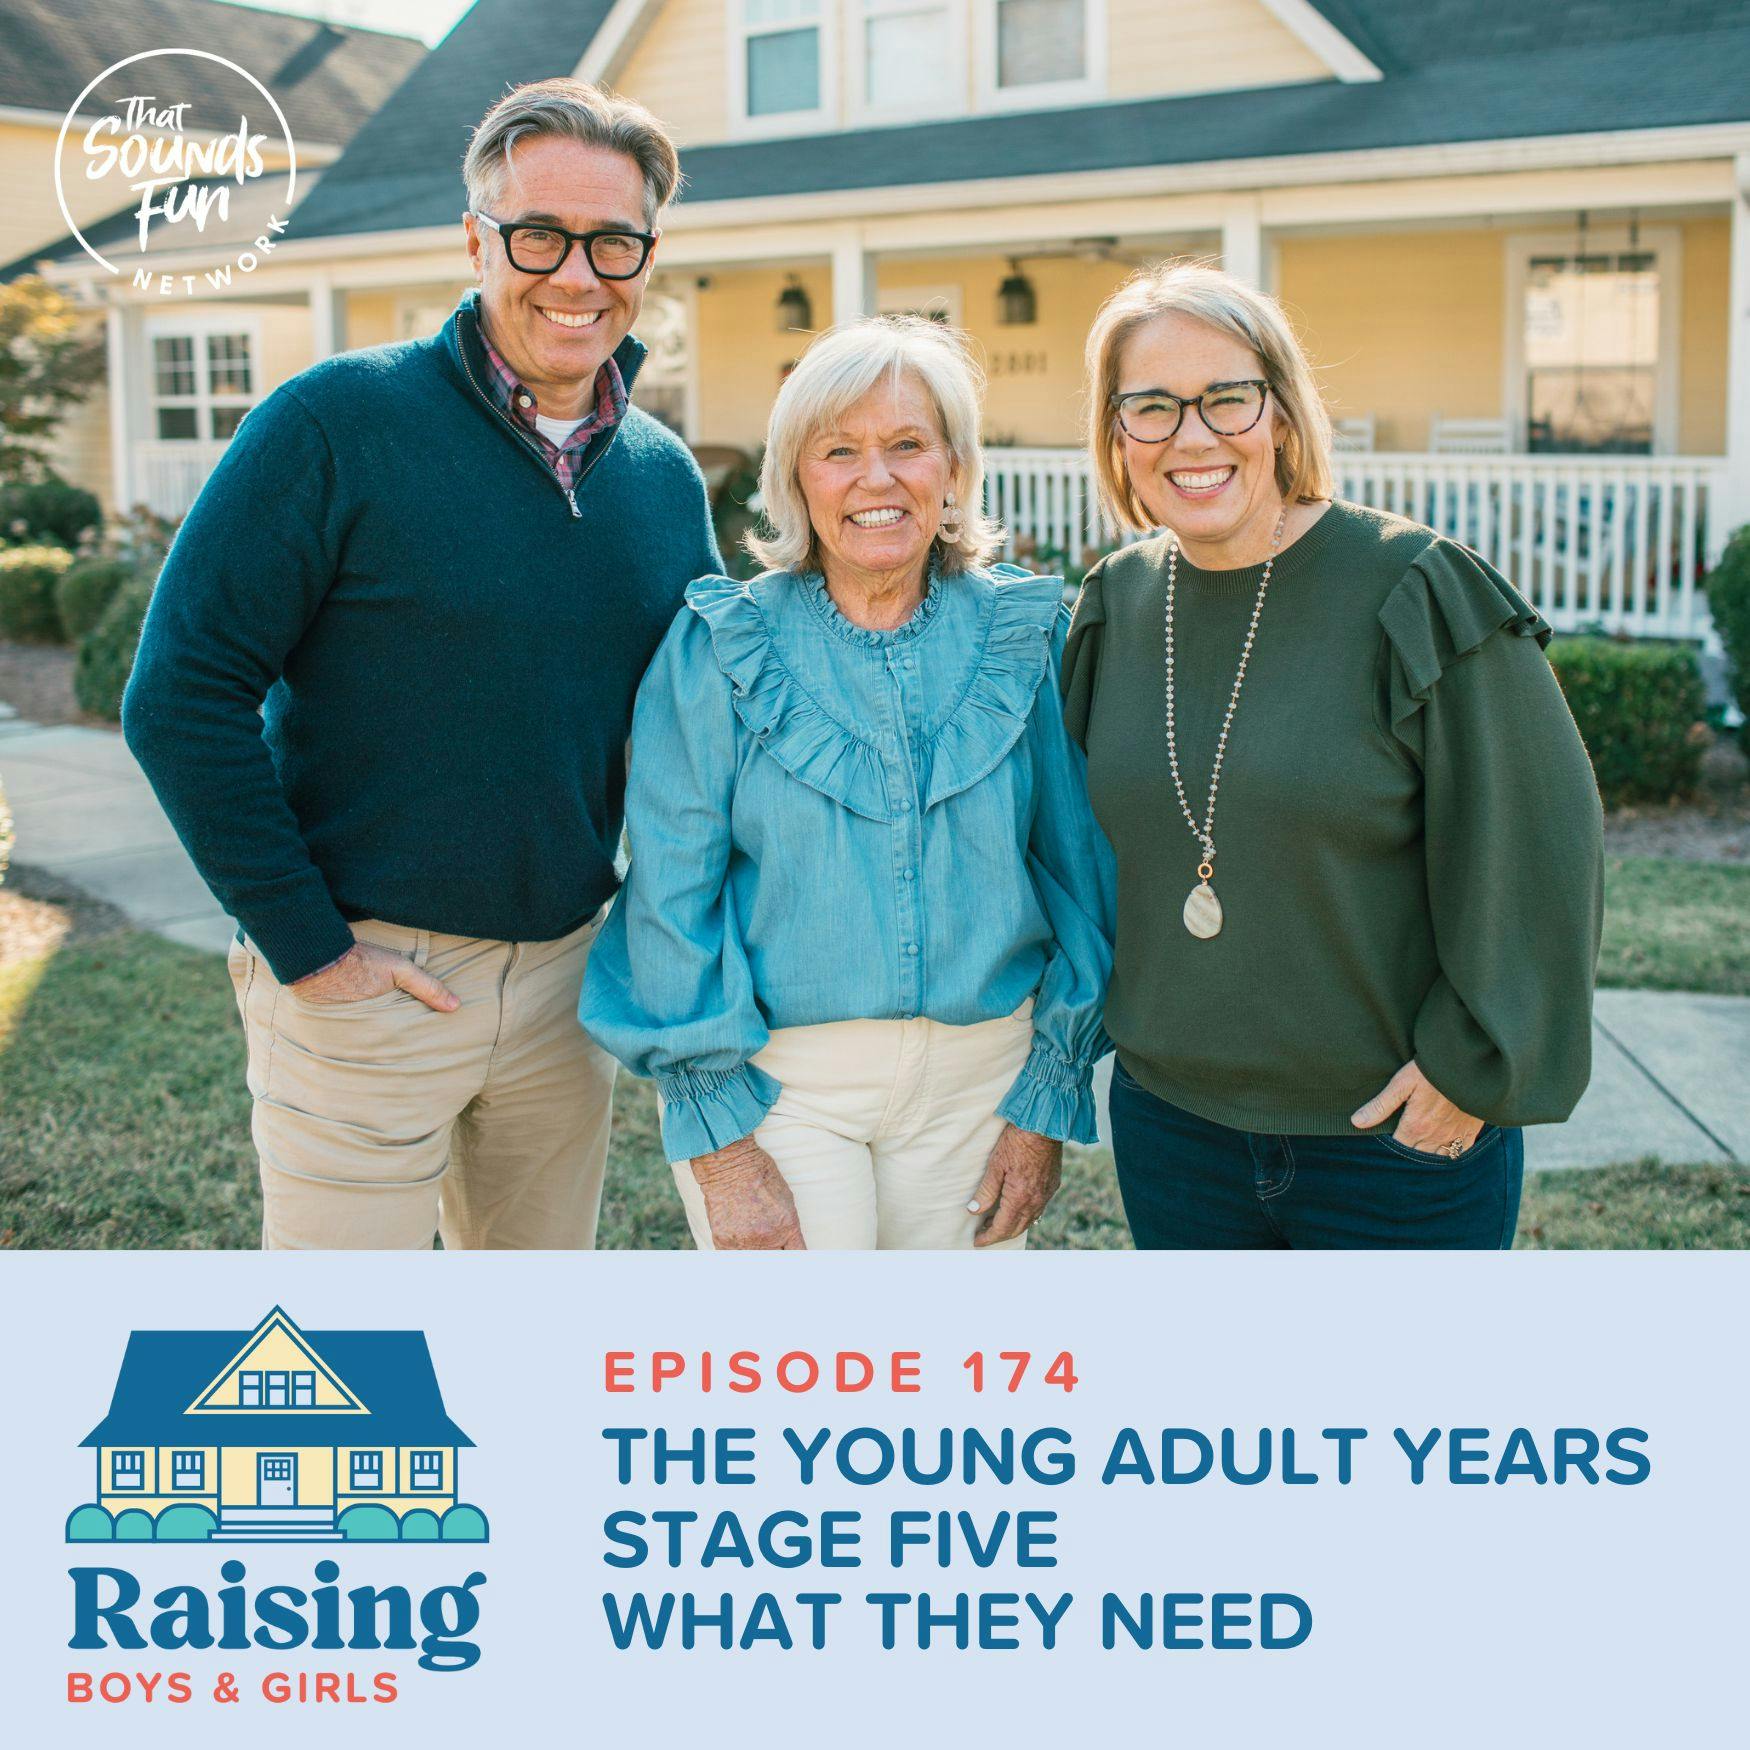 Episode 174: The Young Adult Years - Stage 5—What They Need